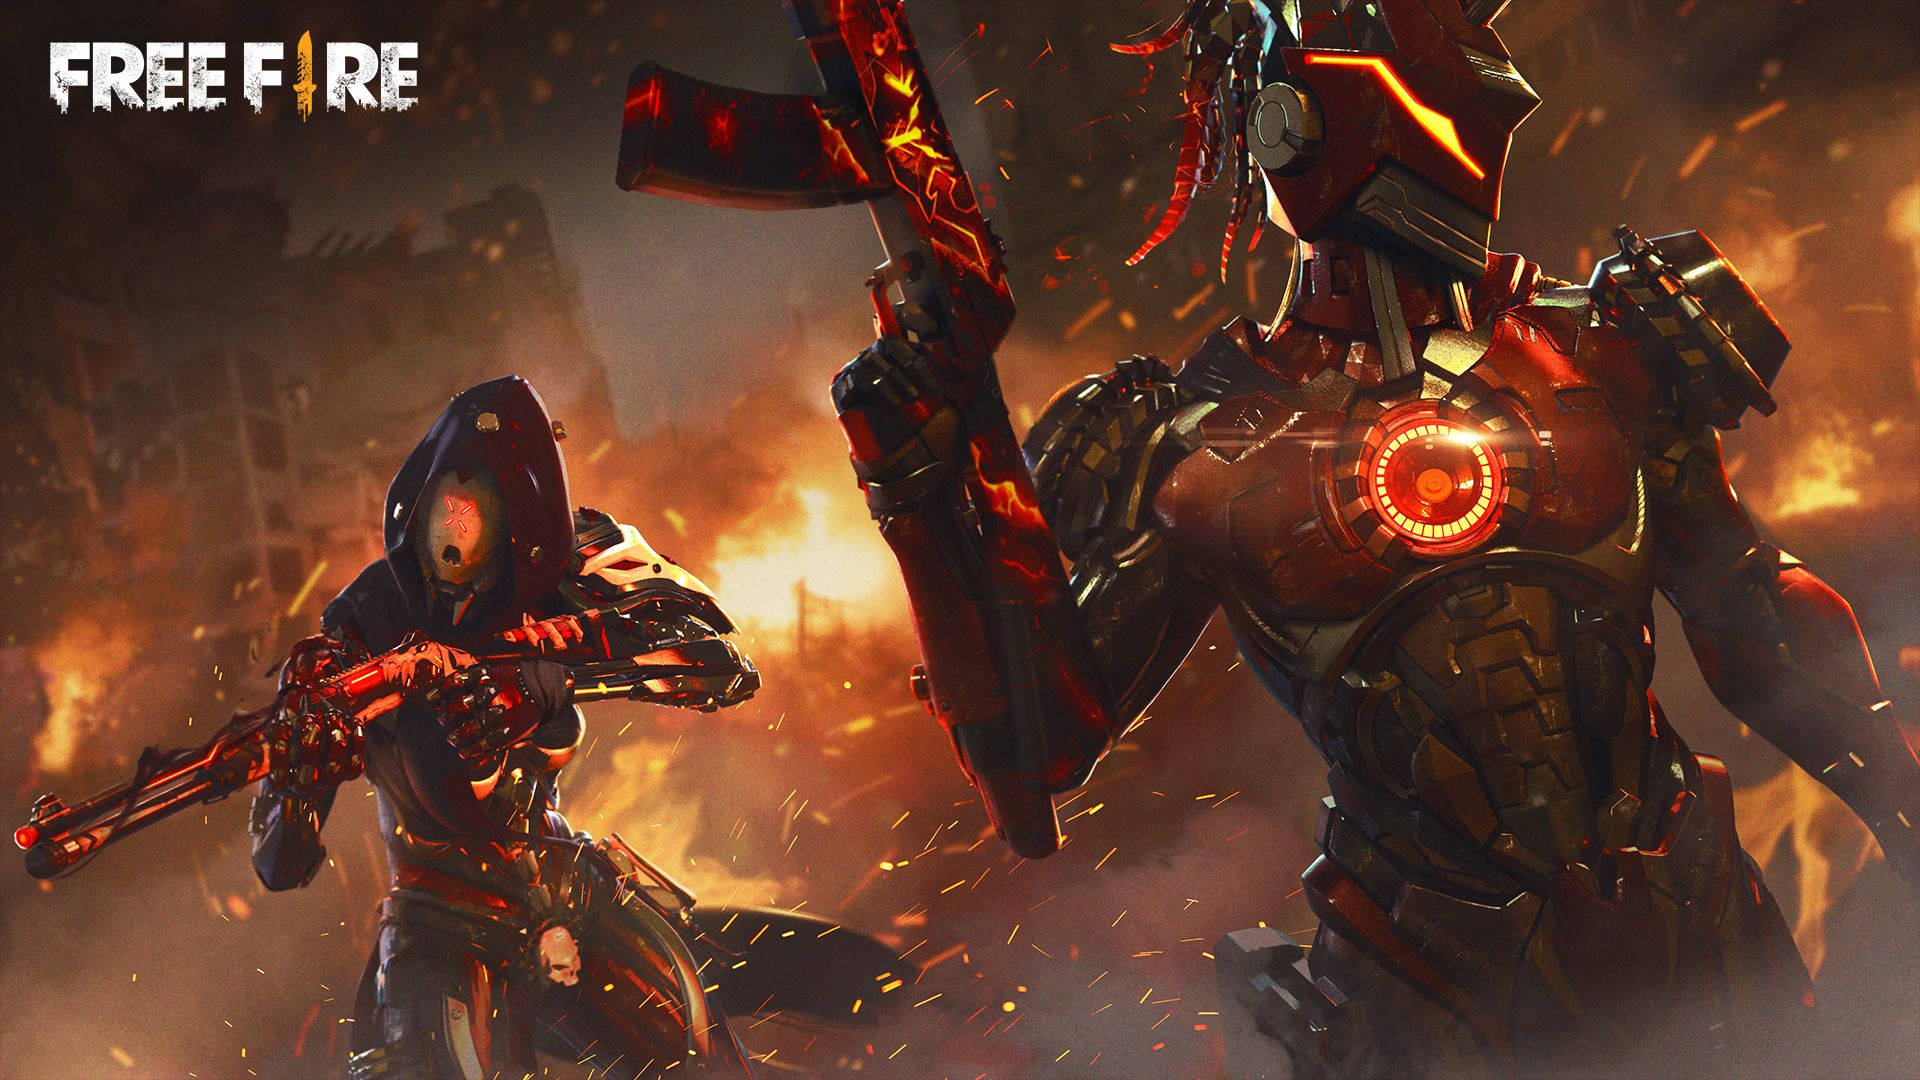 Garena Free Fire Red Robots In Flame Wallpaper